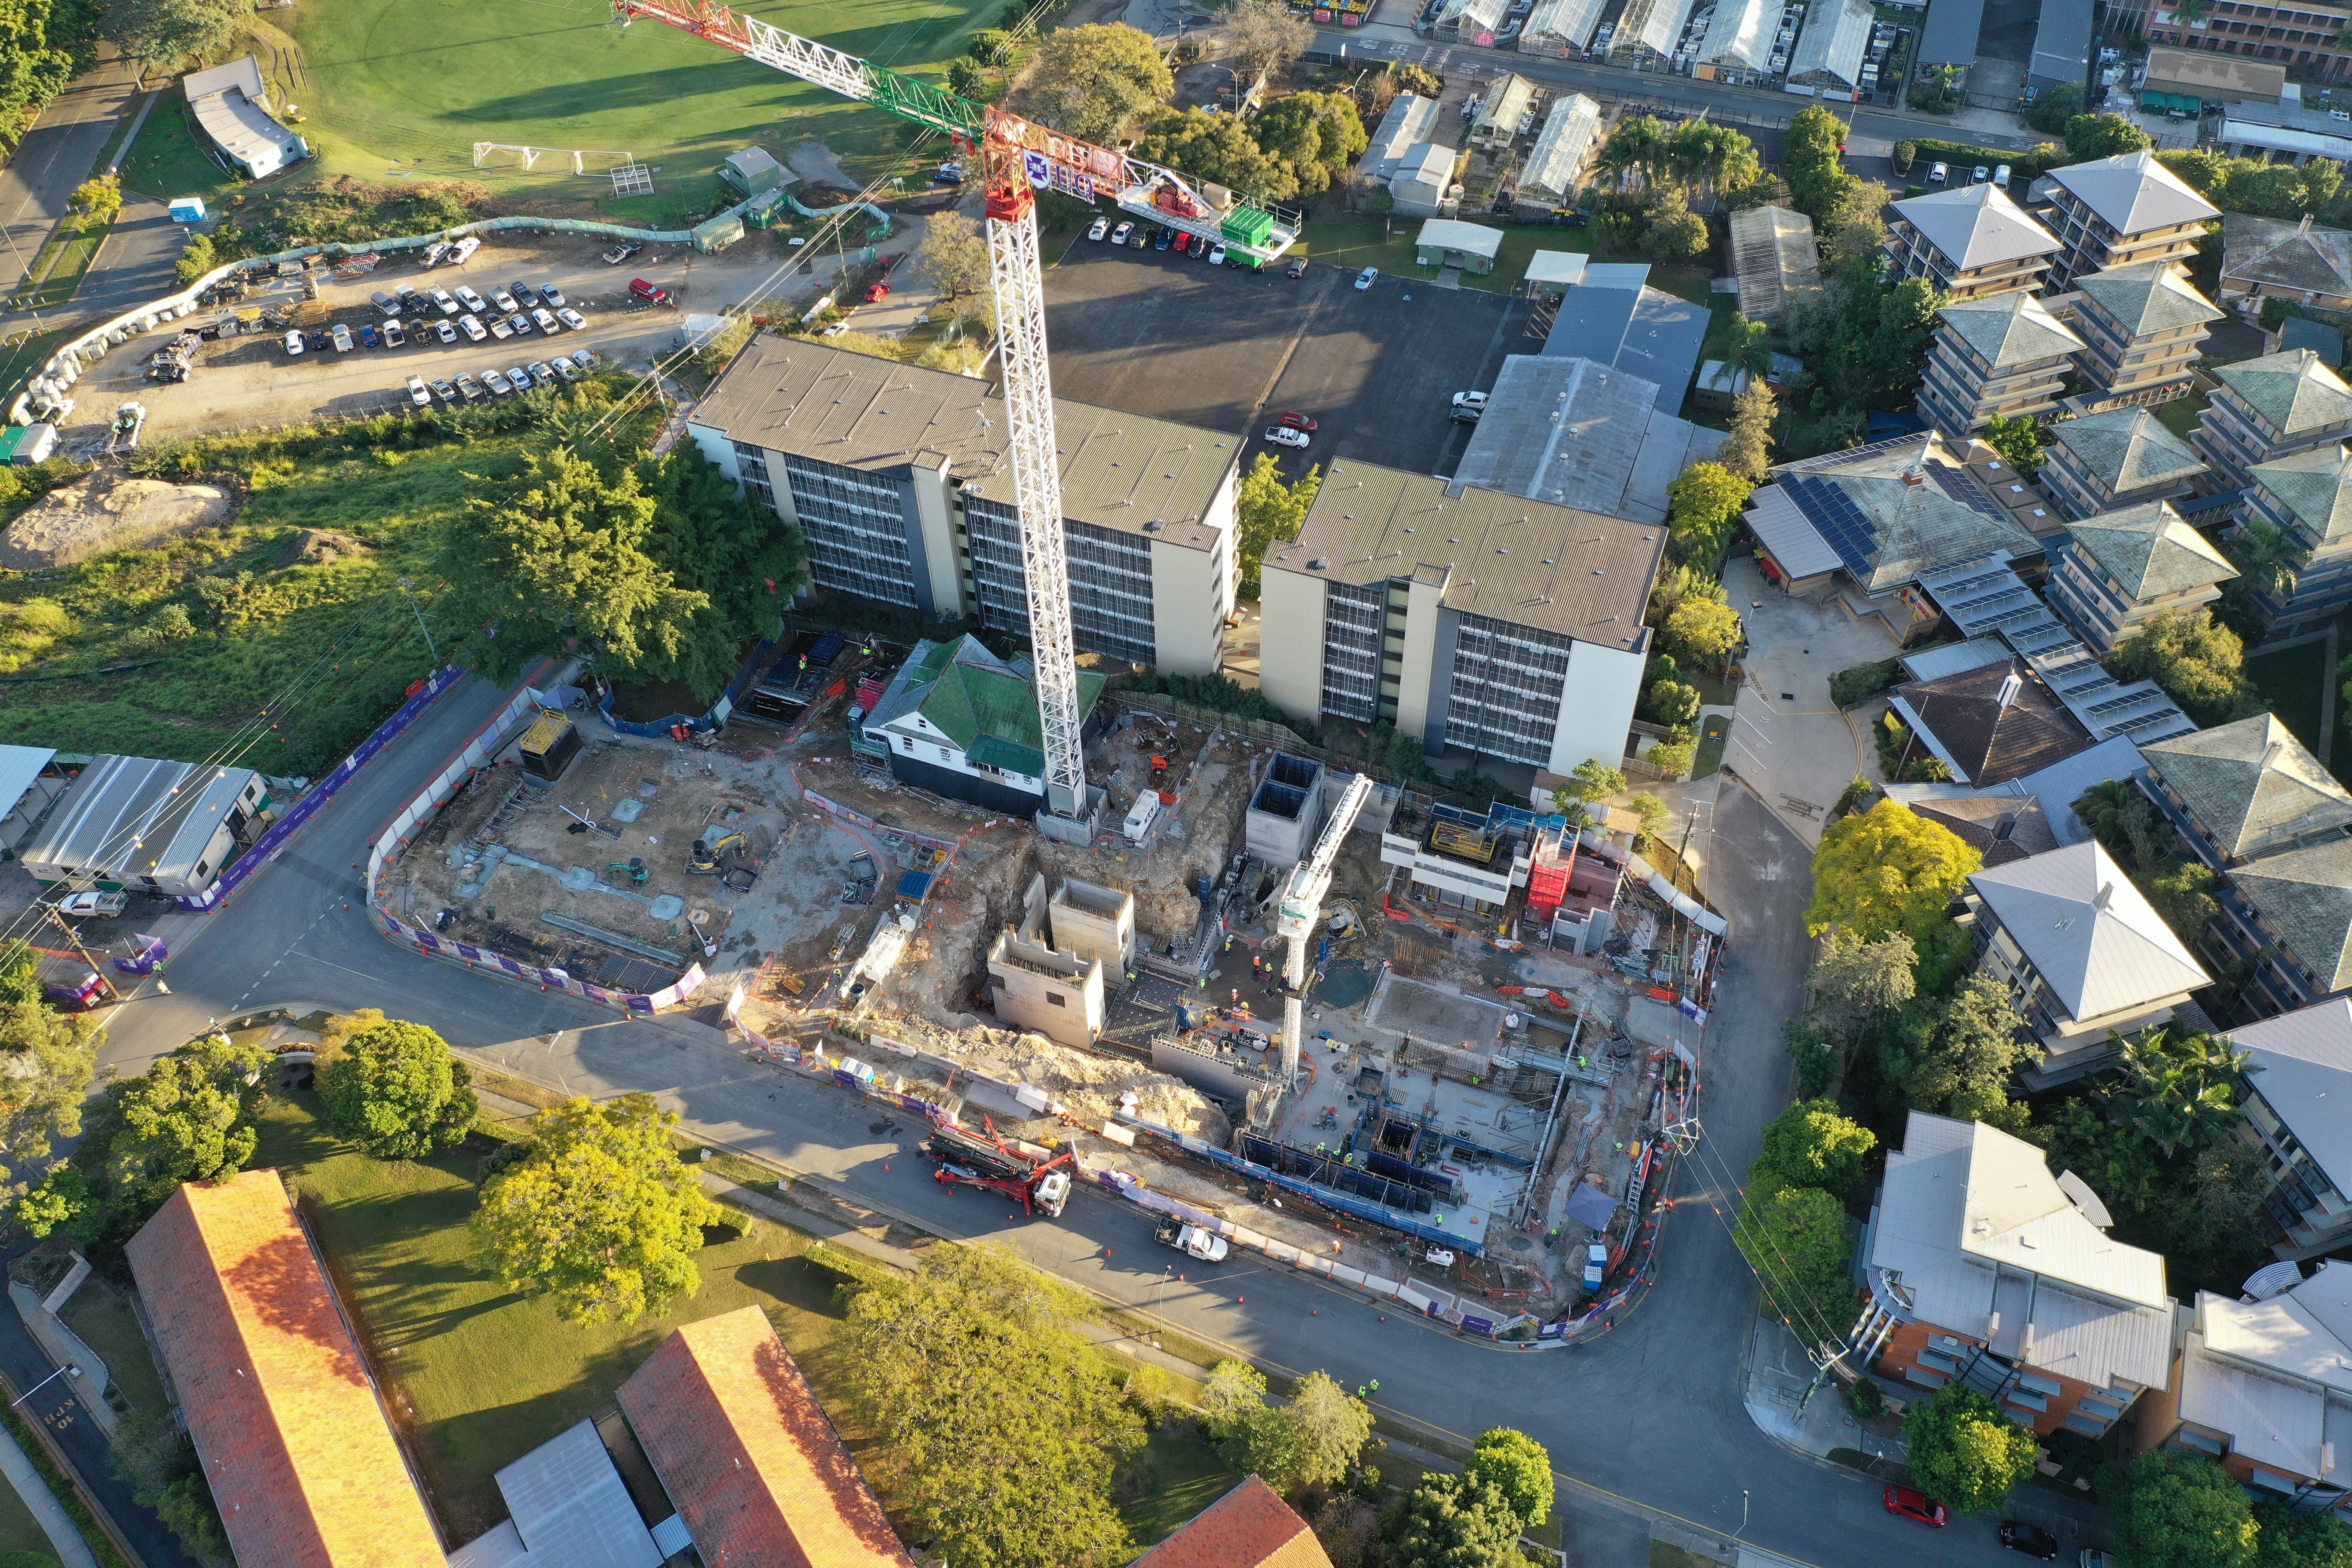 Photo of Student Residence construction site - Drone